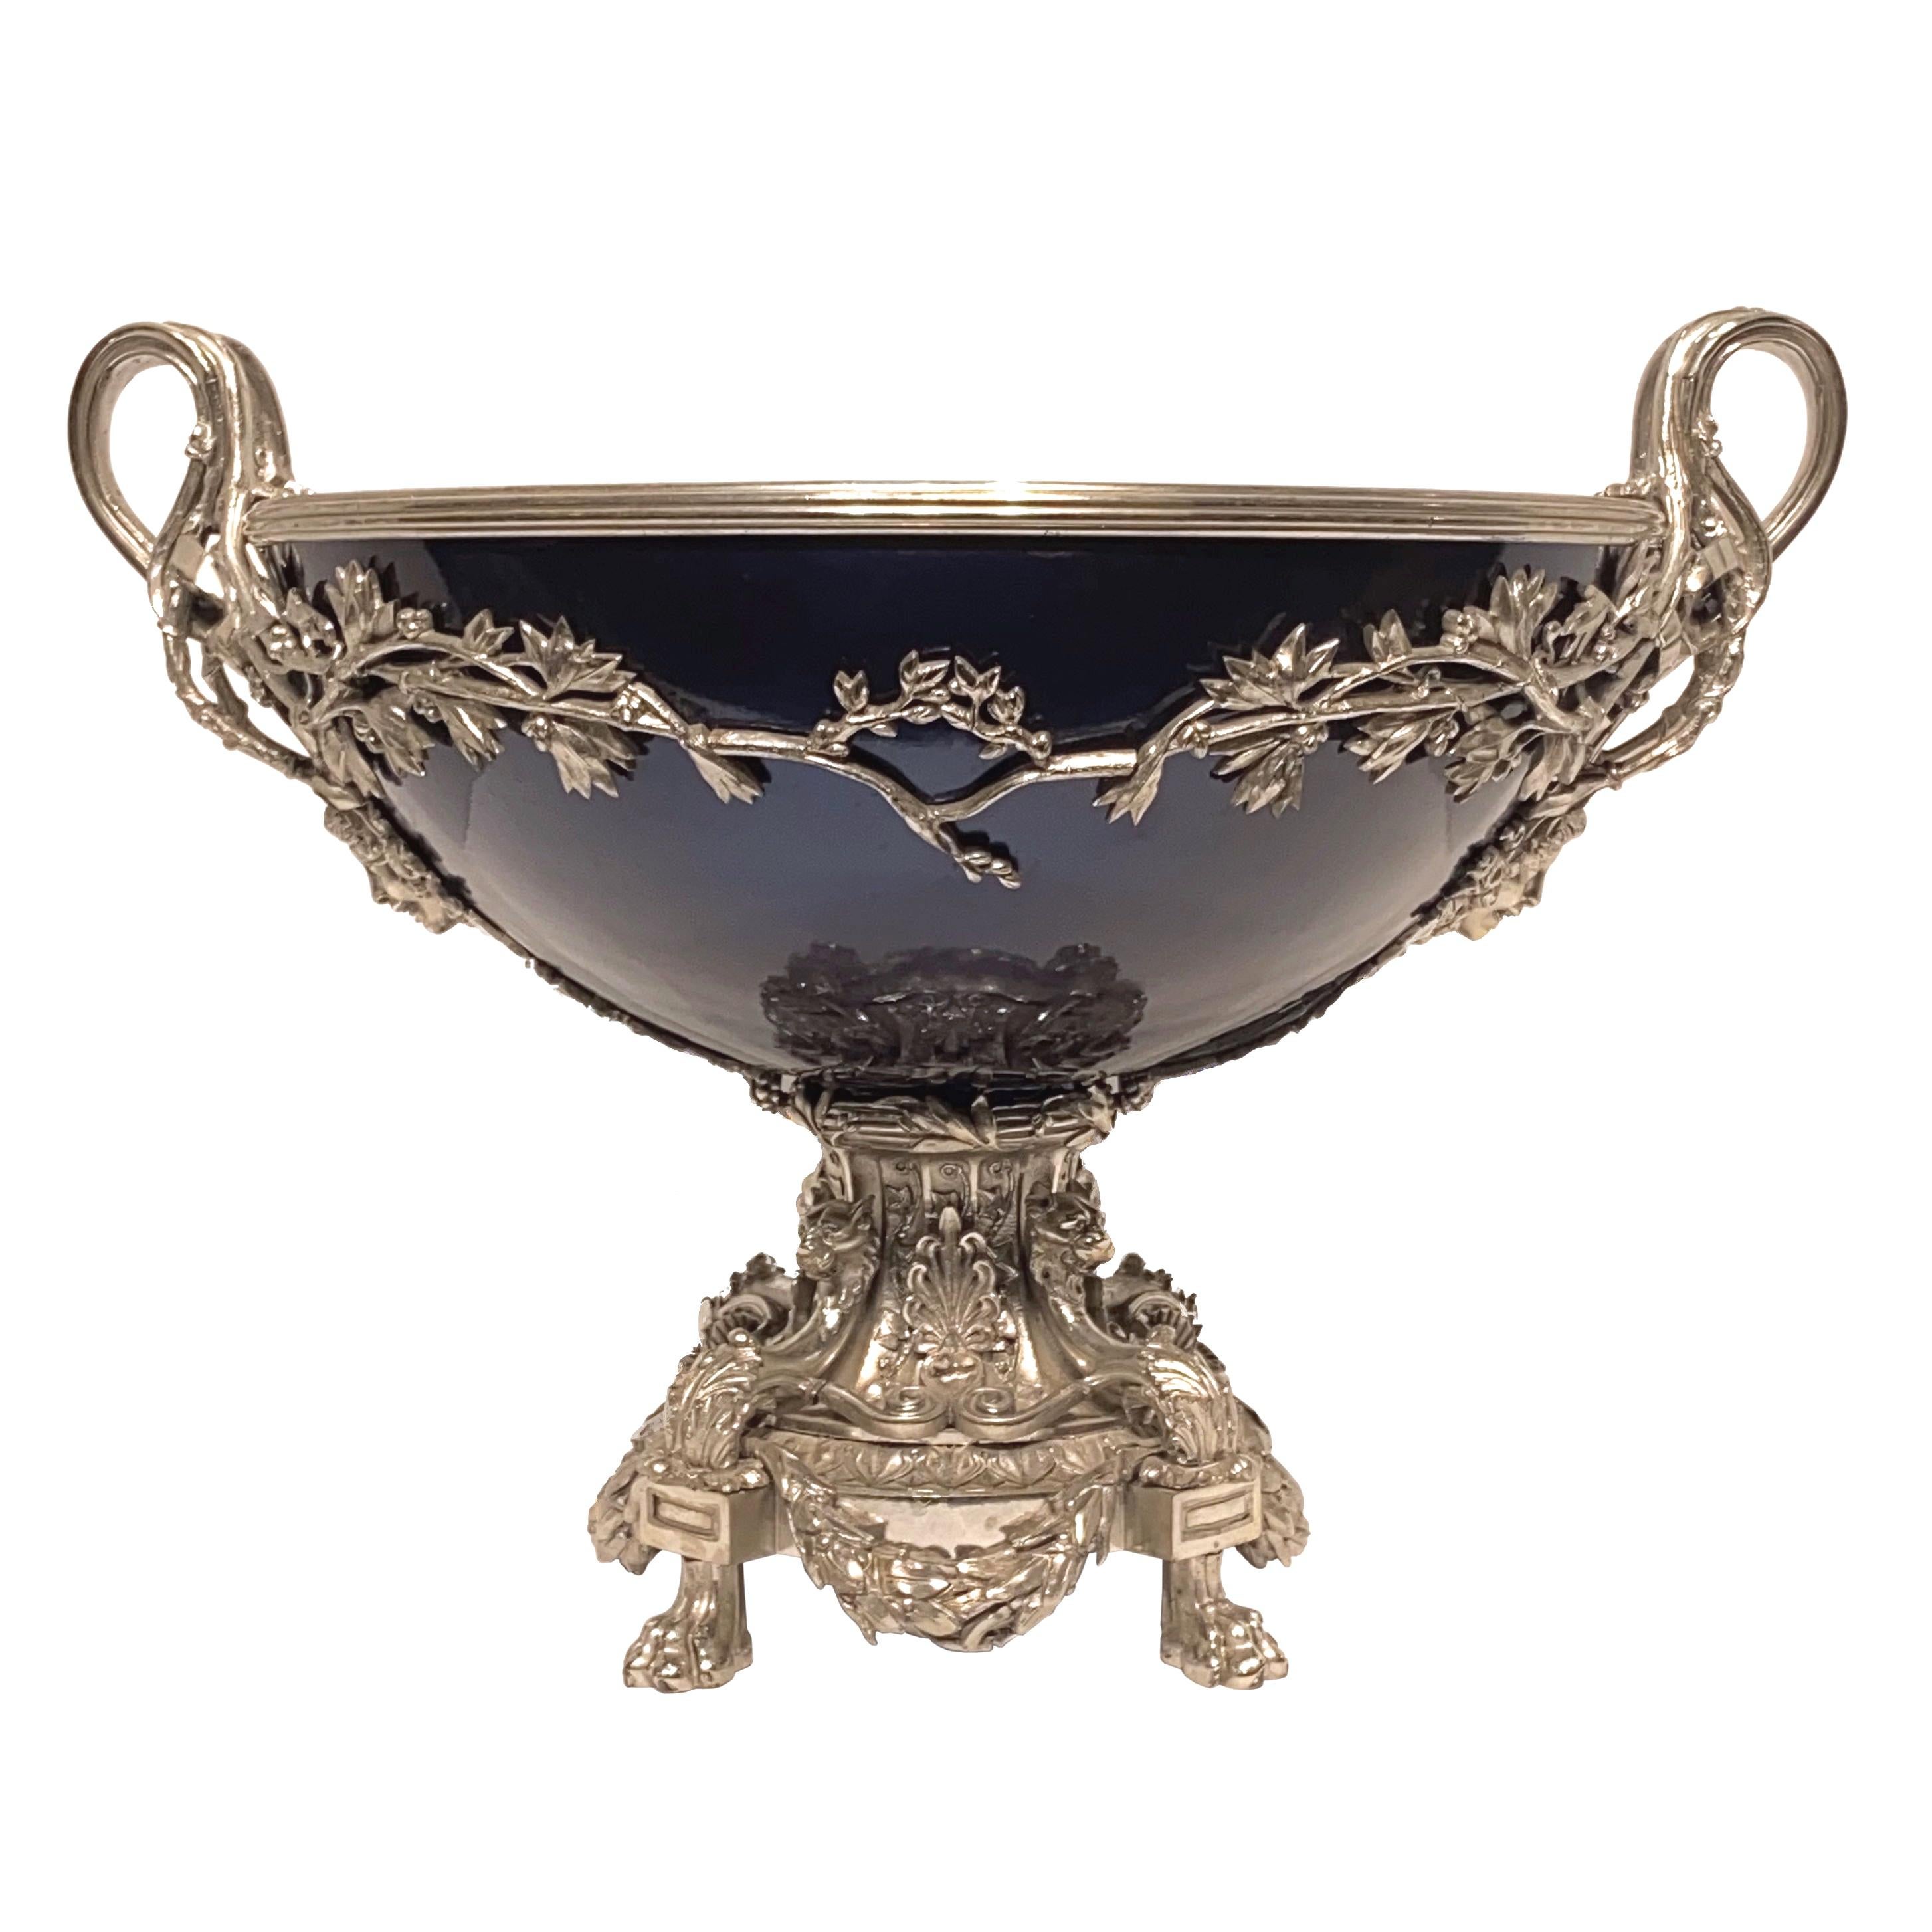 French 19th century Louis XVI style silvered bronze and cobalt blue centerpiece.